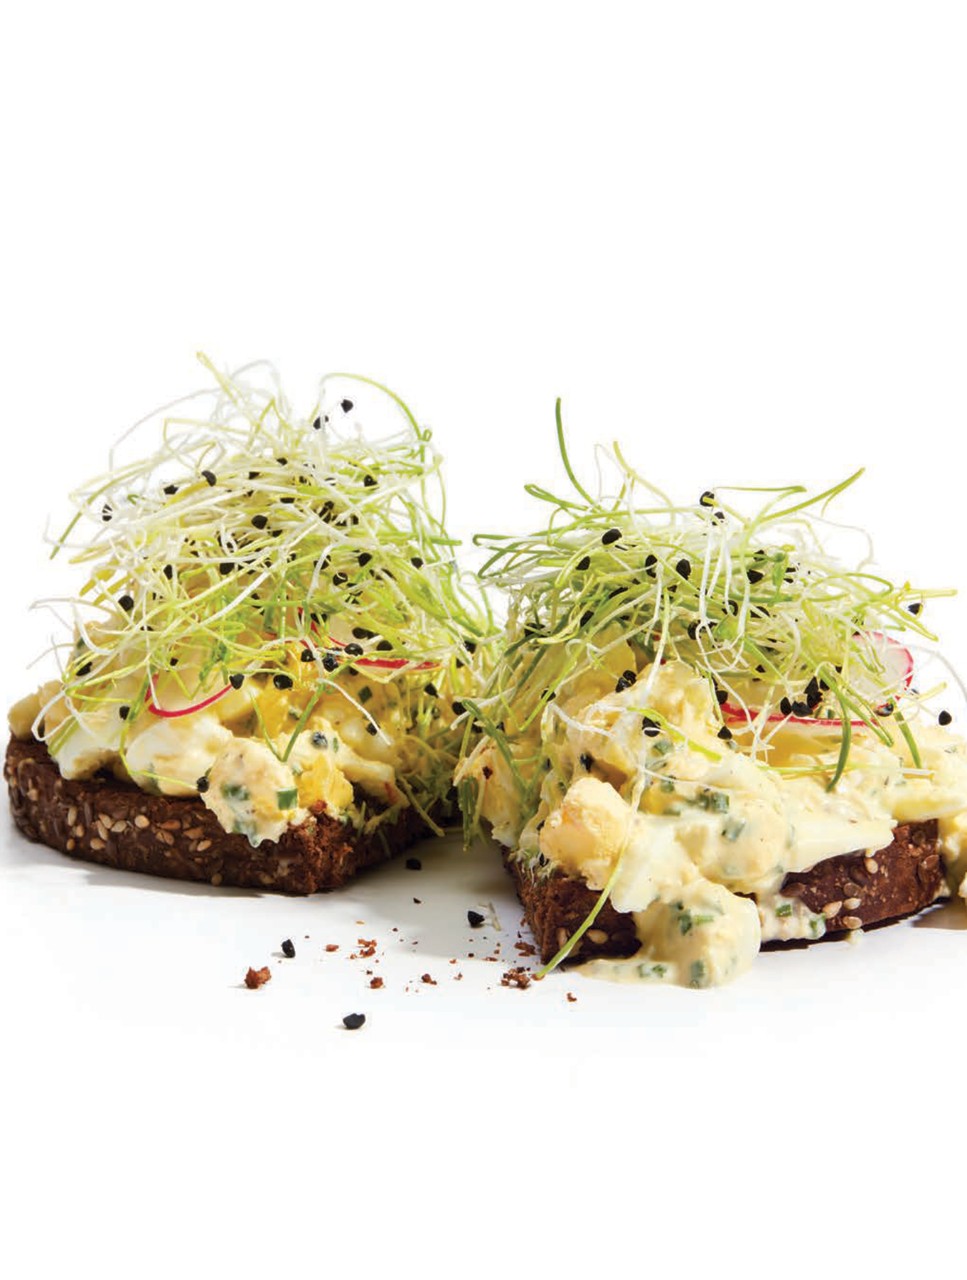 Tartine of Egg Salad with Onion Sprouts & Radishes